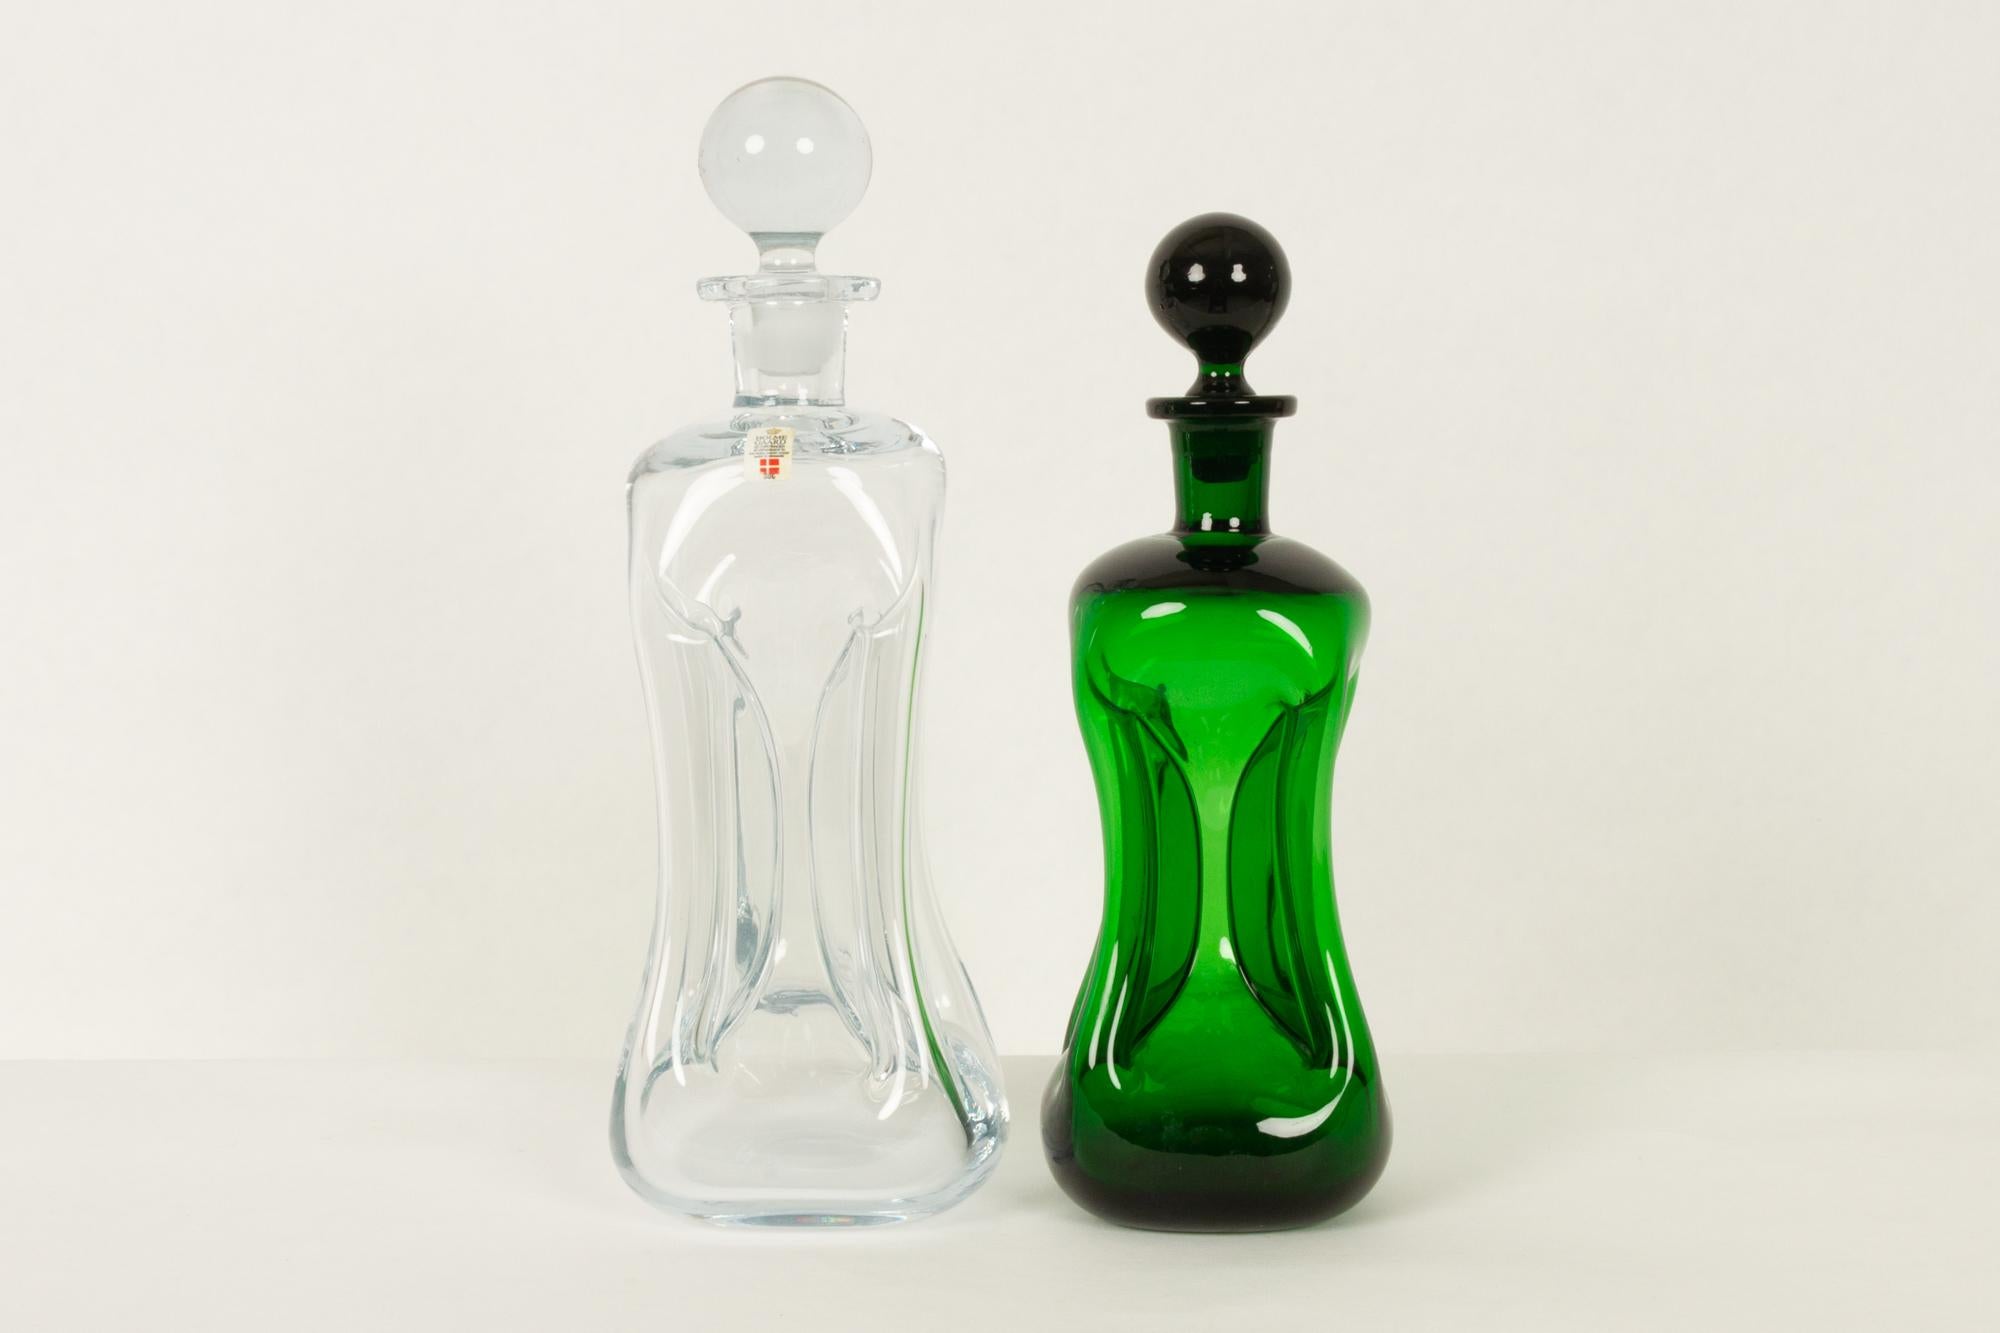 Holmegaard cluck cluck decanters by Jacob E. Bang, 1960s
Set of two Mid-Century Modern hand blown decanters from Danish glassworks Holmegaard. The bottles has got the name from the sound they make when pouring.
One large (31.5cm) in clear glass